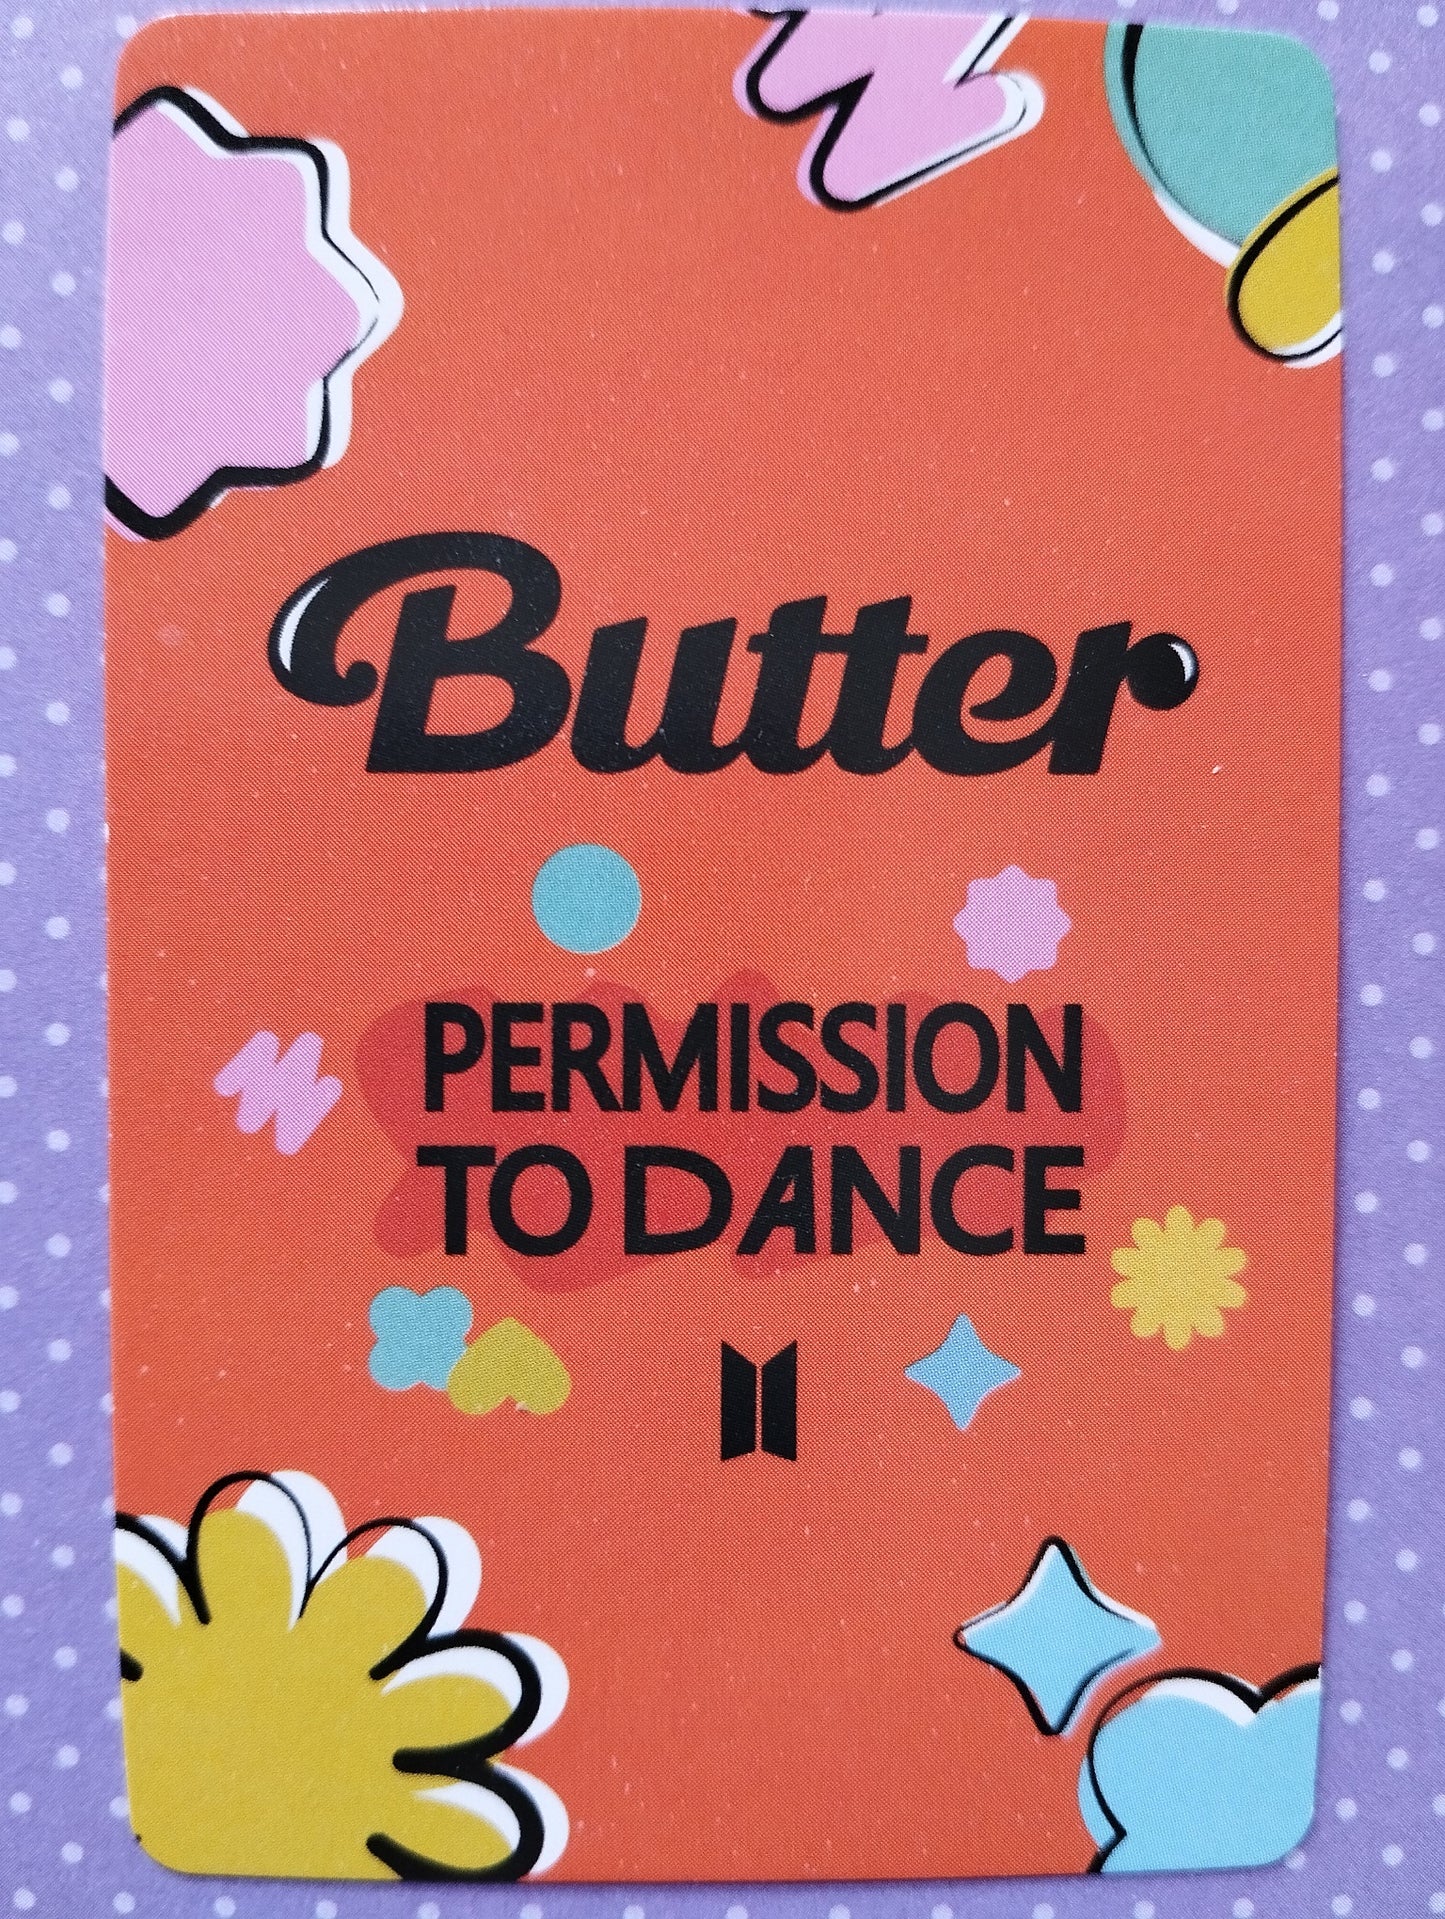 Photocard  BTS  Permission to dance butter  Jungkook